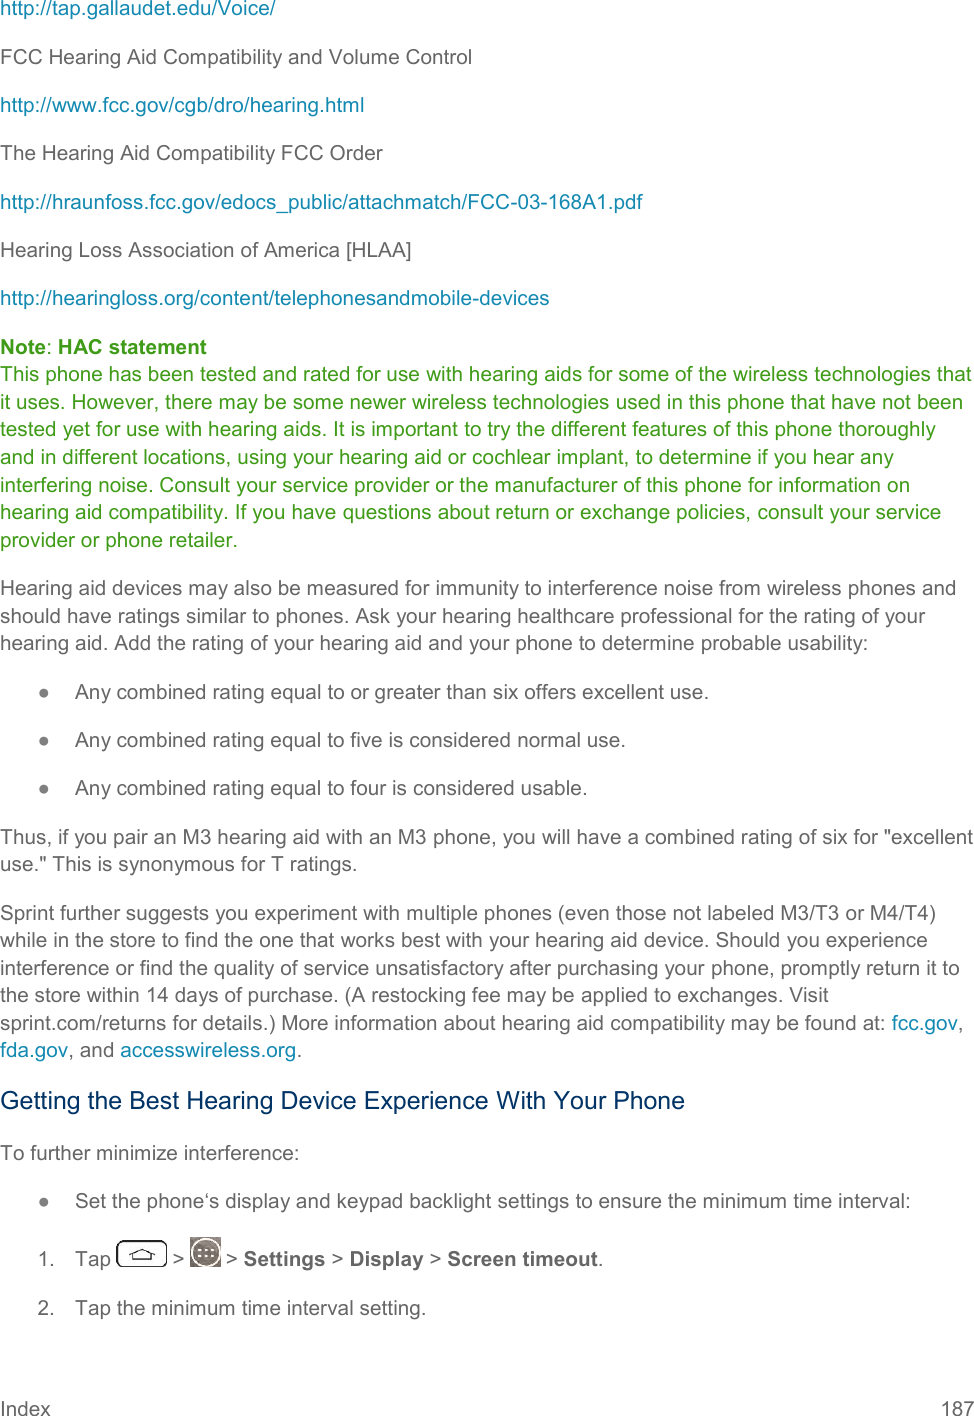 Index 187 http://tap.gallaudet.edu/Voice/ FCC Hearing Aid Compatibility and Volume Control http://www.fcc.gov/cgb/dro/hearing.html The Hearing Aid Compatibility FCC Order http://hraunfoss.fcc.gov/edocs_public/attachmatch/FCC-03-168A1.pdf Hearing Loss Association of America [HLAA] http://hearingloss.org/content/telephonesandmobile-devices Note: HAC statement  This phone has been tested and rated for use with hearing aids for some of the wireless technologies that it uses. However, there may be some newer wireless technologies used in this phone that have not been tested yet for use with hearing aids. It is important to try the different features of this phone thoroughly and in different locations, using your hearing aid or cochlear implant, to determine if you hear any interfering noise. Consult your service provider or the manufacturer of this phone for information on hearing aid compatibility. If you have questions about return or exchange policies, consult your service provider or phone retailer. Hearing aid devices may also be measured for immunity to interference noise from wireless phones and should have ratings similar to phones. Ask your hearing healthcare professional for the rating of your hearing aid. Add the rating of your hearing aid and your phone to determine probable usability: ●  Any combined rating equal to or greater than six offers excellent use. ●  Any combined rating equal to five is considered normal use. ●  Any combined rating equal to four is considered usable. Thus, if you pair an M3 hearing aid with an M3 phone, you will have a combined rating of six for &quot;excellent use.&quot; This is synonymous for T ratings. Sprint further suggests you experiment with multiple phones (even those not labeled M3/T3 or M4/T4) while in the store to find the one that works best with your hearing aid device. Should you experience interference or find the quality of service unsatisfactory after purchasing your phone, promptly return it to the store within 14 days of purchase. (A restocking fee may be applied to exchanges. Visit sprint.com/returns for details.) More information about hearing aid compatibility may be found at: fcc.gov, fda.gov, and accesswireless.org. Getting the Best Hearing Device Experience With Your Phone To further minimize interference: ●  Set the phone‘s display and keypad backlight settings to ensure the minimum time interval: 1.  Tap   &gt;   &gt; Settings &gt; Display &gt; Screen timeout. 2.  Tap the minimum time interval setting. 